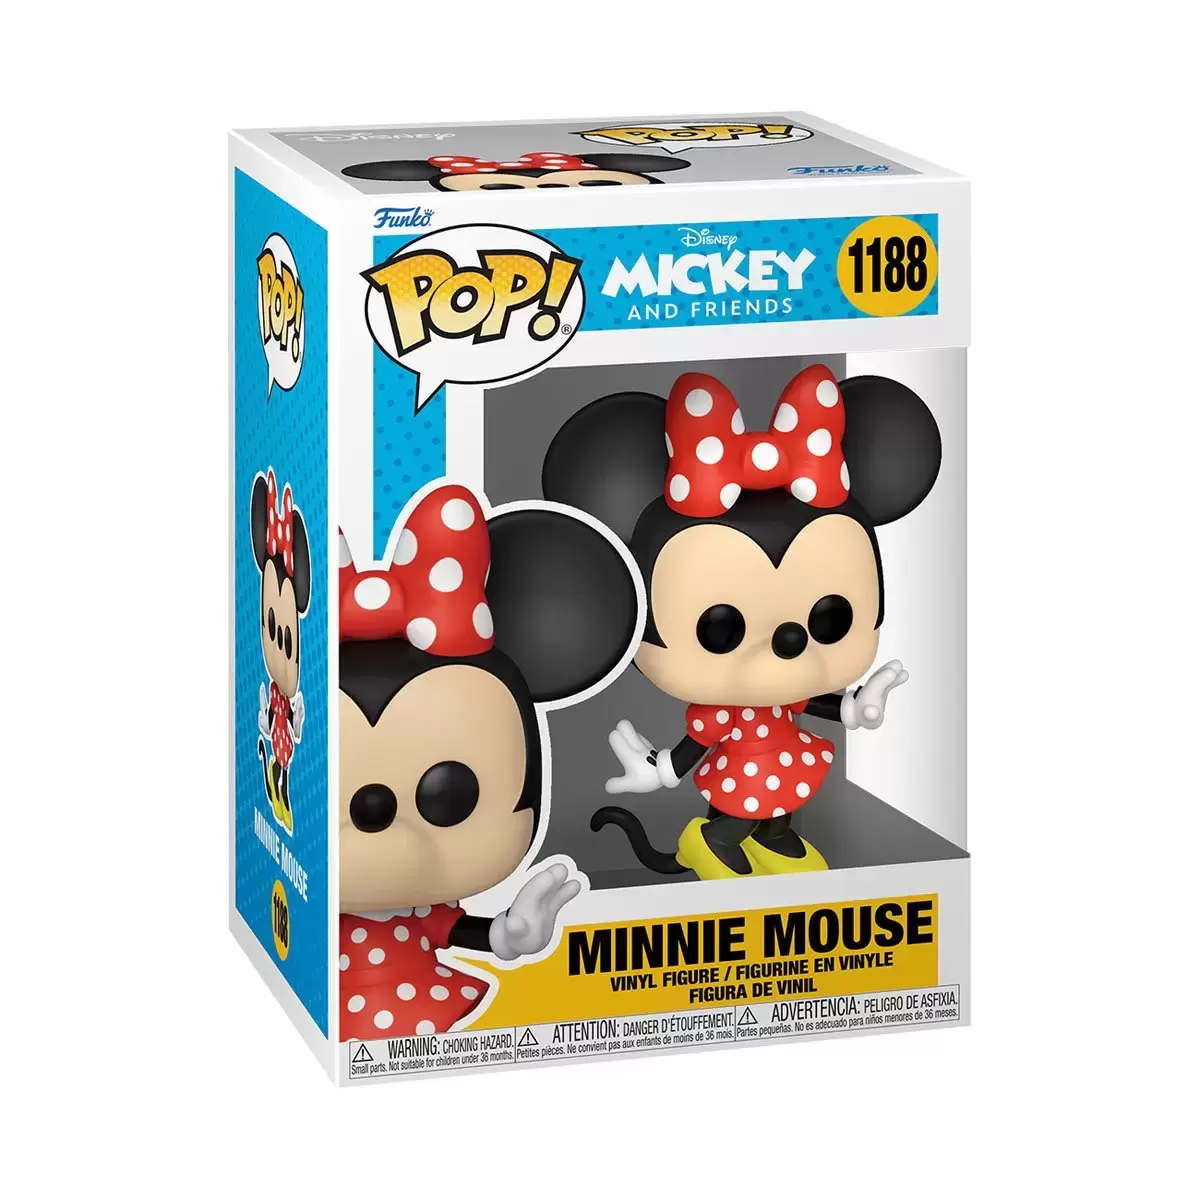 POP! Disney - Mickey and Friends - Minnie Mouse